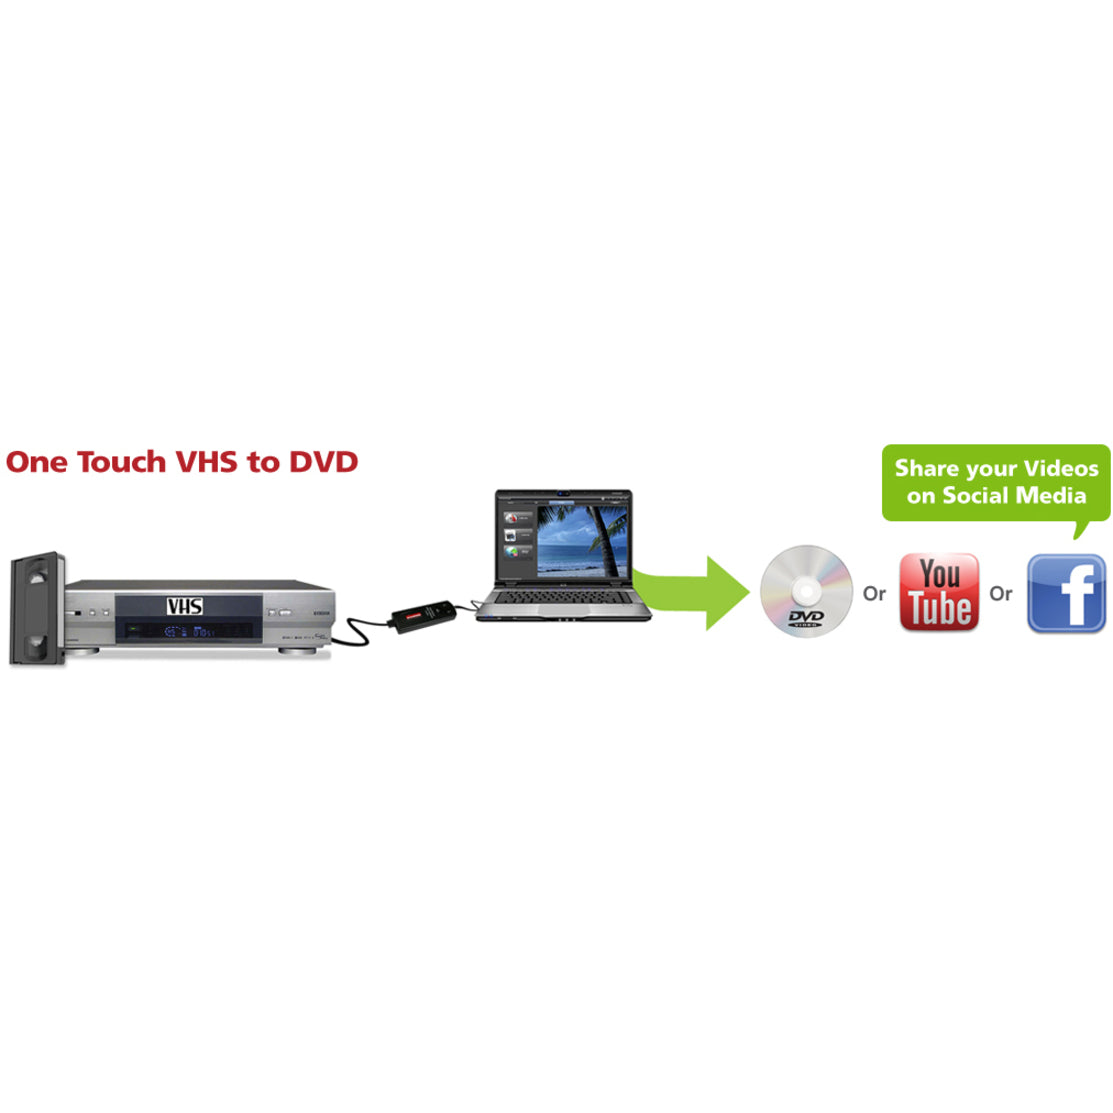 DIAMOND VC500 One-Touch Video Capture Edit Stream or Burn to DVD USB 2.0 [Discontinued]